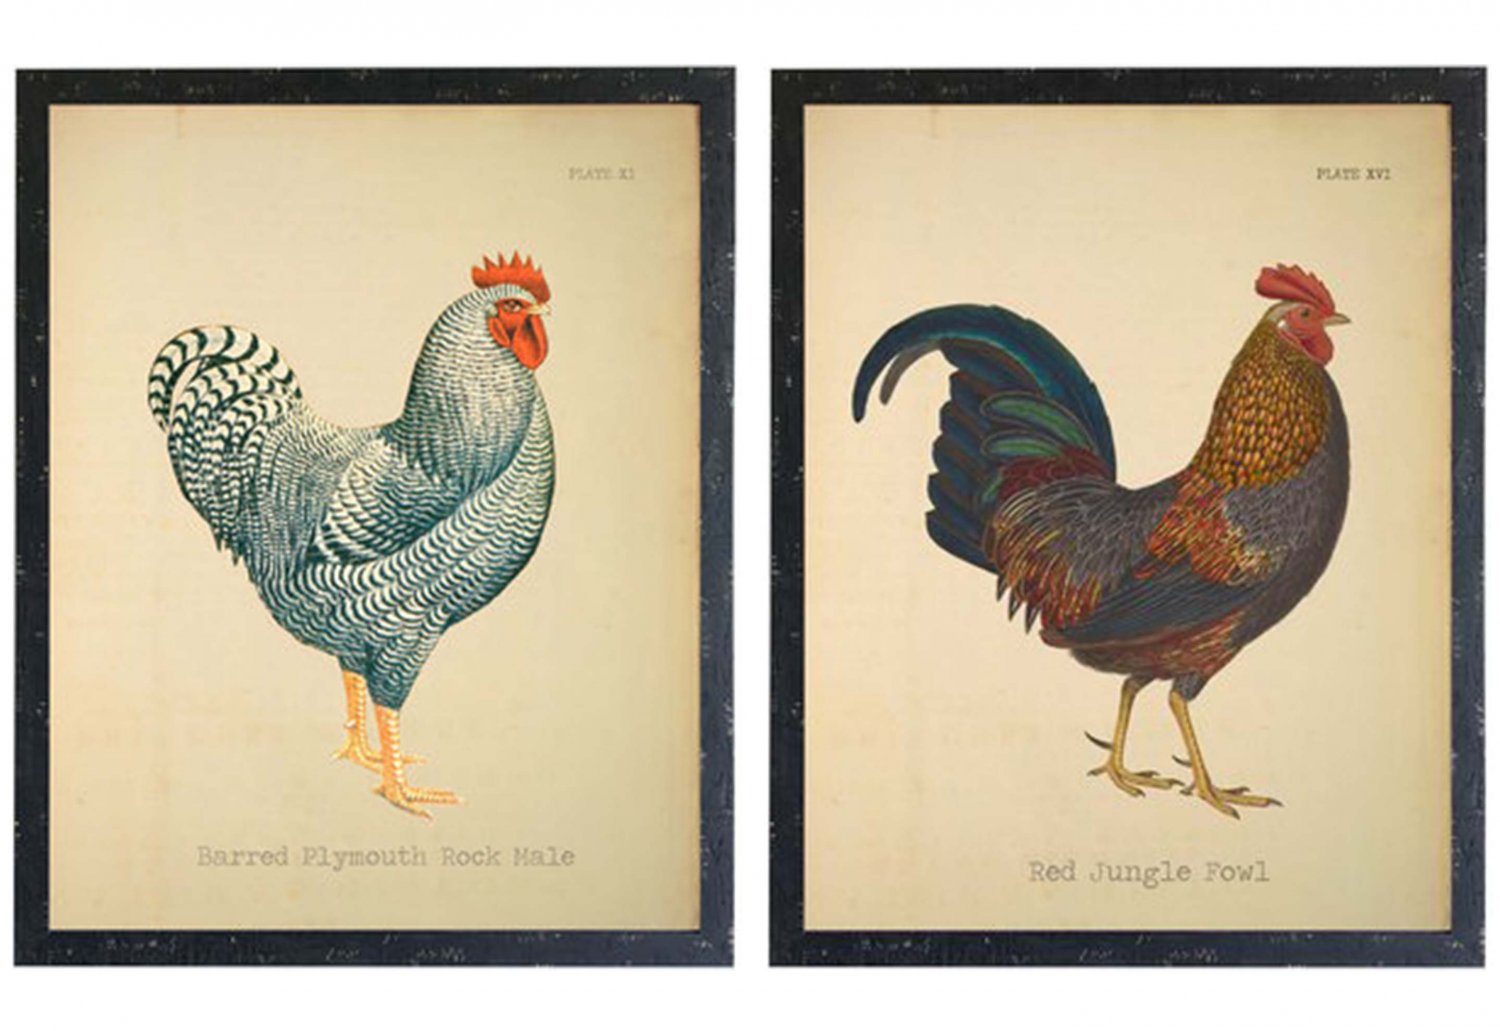 Farmhouse Roosters - Set Of 2